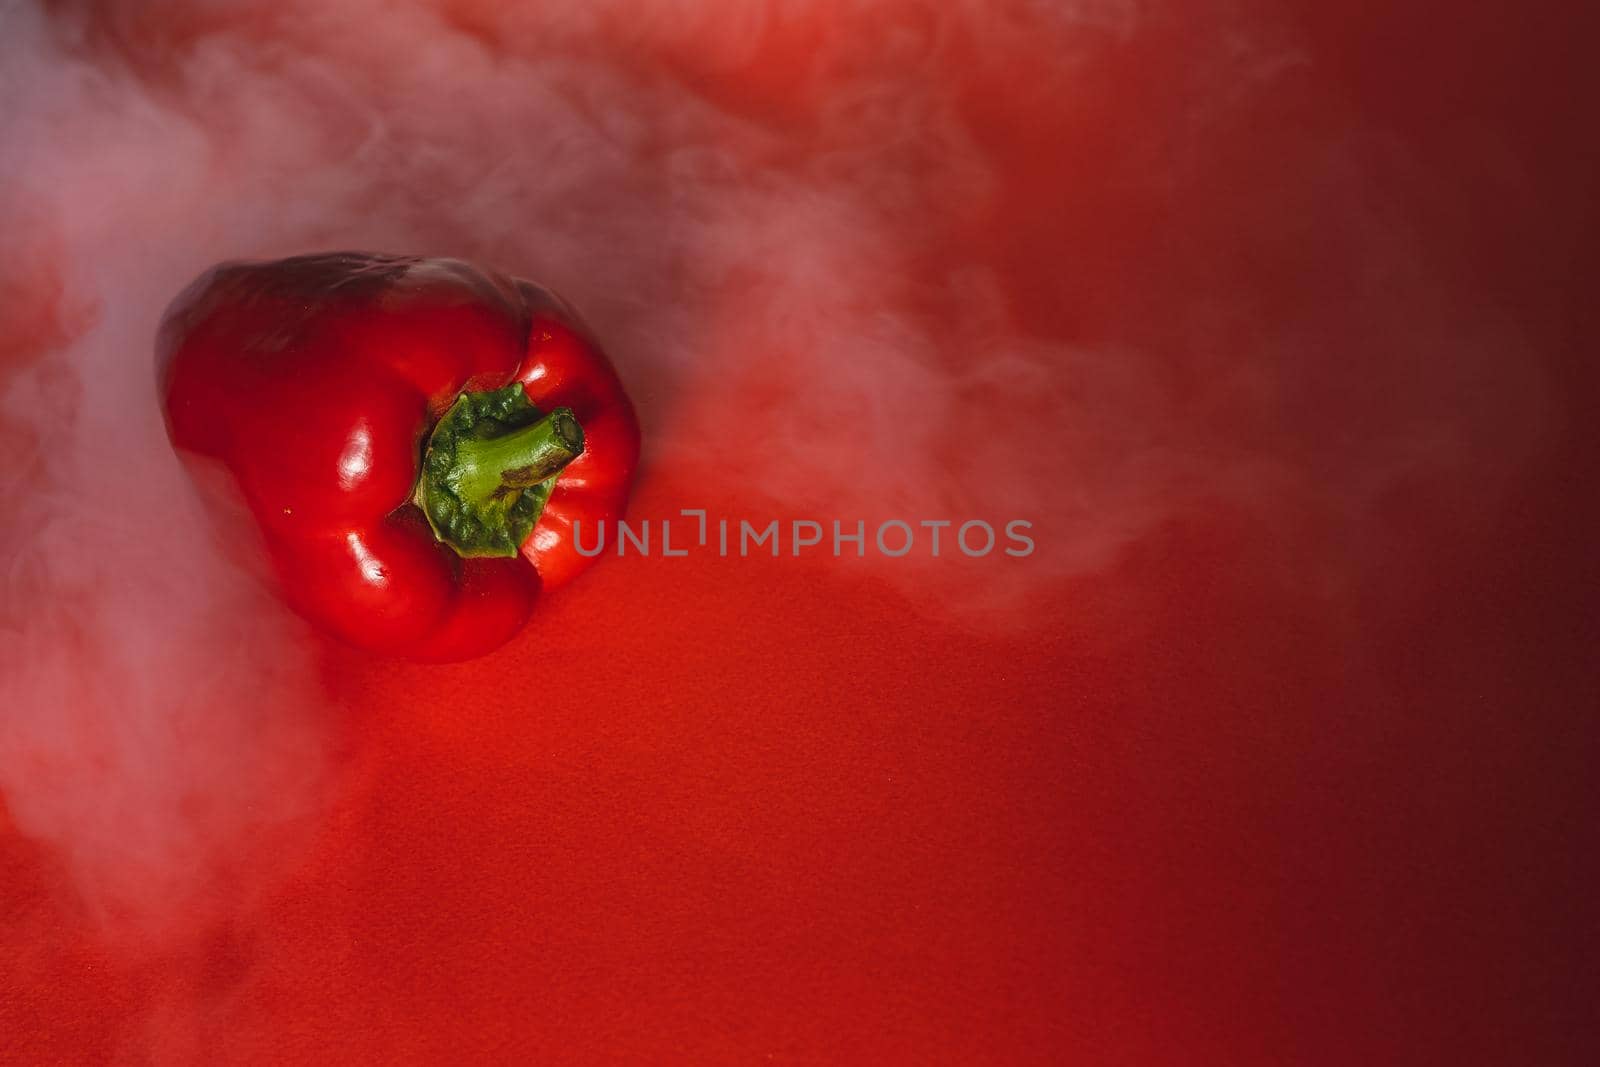 SWEET, fresh RED PEPPER ON RED BACKGROUND With smoke around, pepper. photo for the menu, proper nutrition. fresh vegetables.